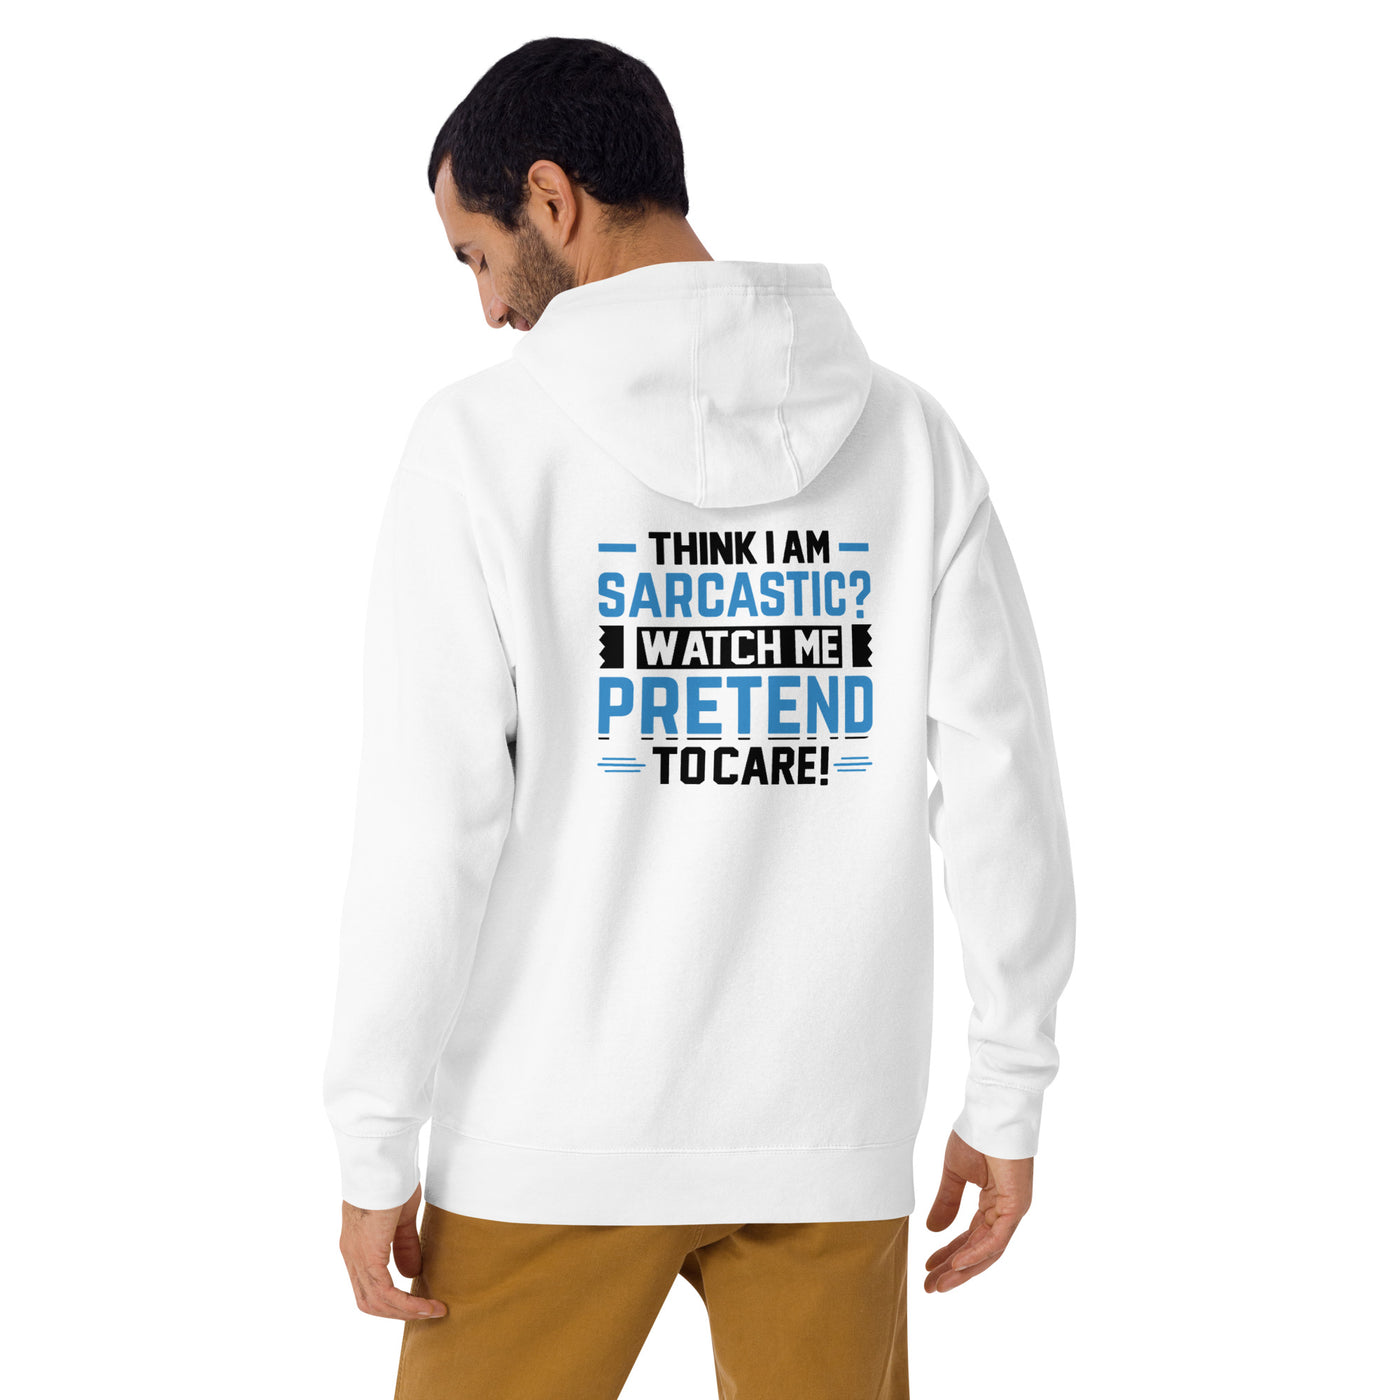 Think I am sarcastic? Watch me pretend to care, - Unisex Hoodie ( Back Print )